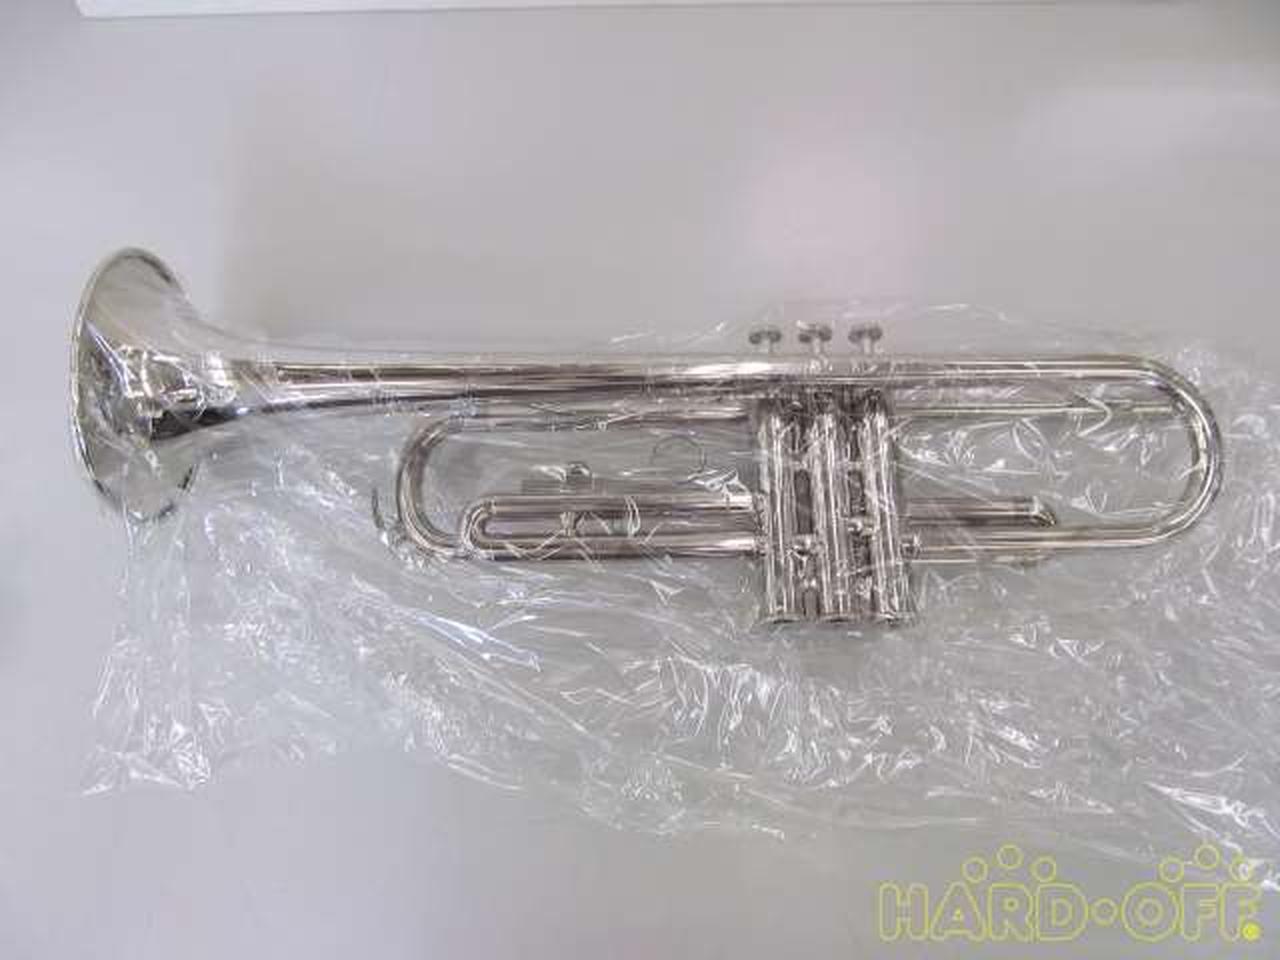 YTR-1310 YAMAHA Trumpet with Hard Case/Mouthpiece Brass instrument Japan USED